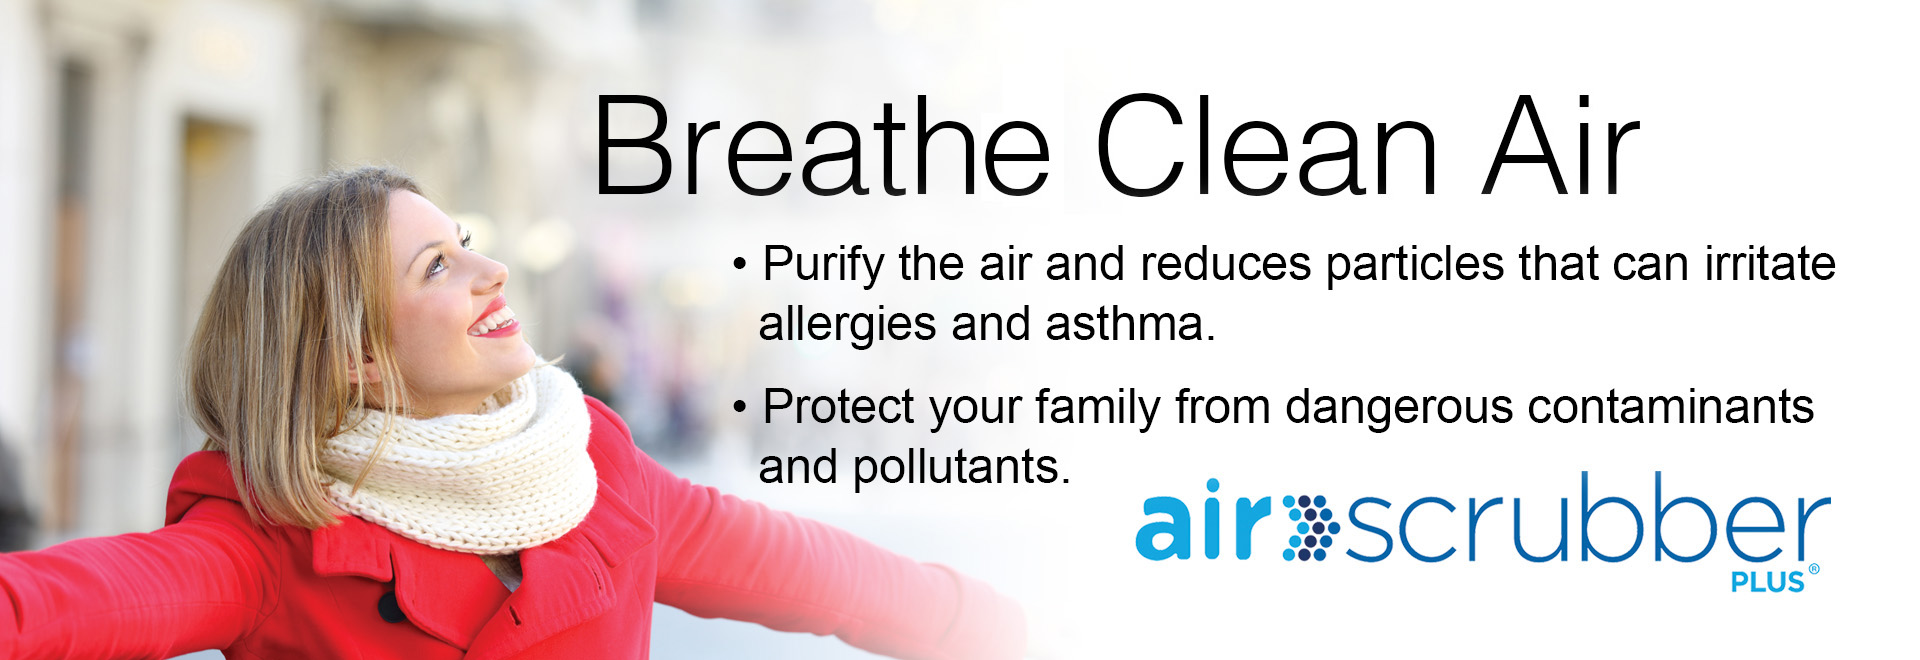 Breathe Clean Air with Air Scrubber, Purify the air, and protects your family for dangerous contaminaants and pollutants